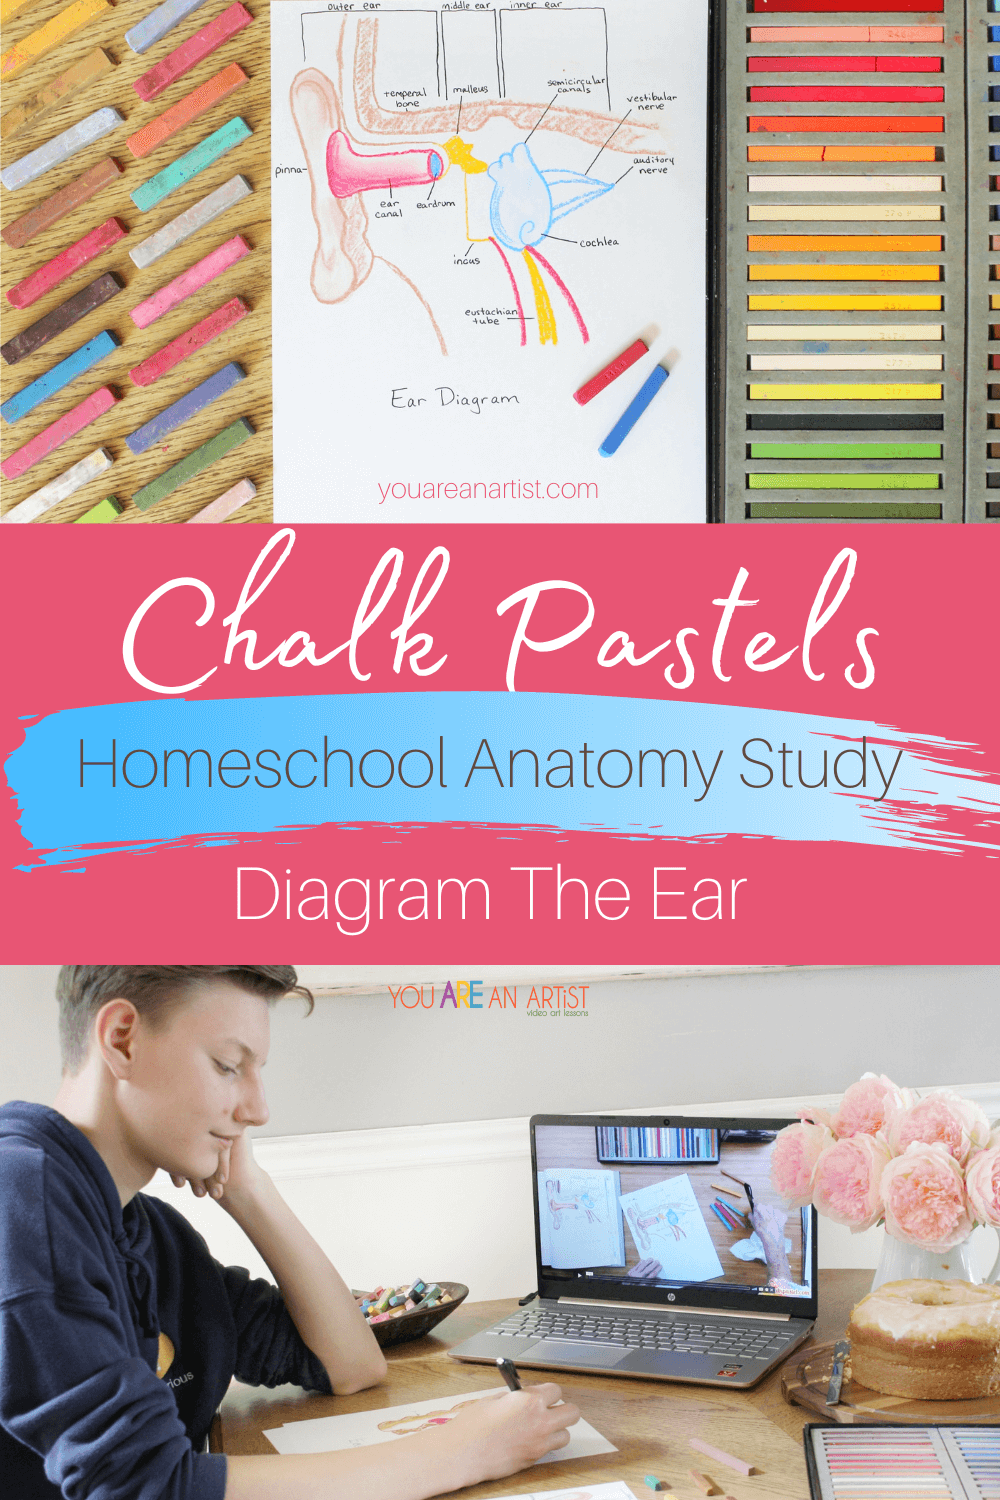 Homeschool Anatomy Study: Diagram The Ear - Hey, did you hear? Nana has a homeschool science ear diagram activity! This activity is a perfect way to learn the inner workings of the human ear while being creative and a bit messy with chalk pastels! #chalkpastels #YouAREAnArtist #homeschhool